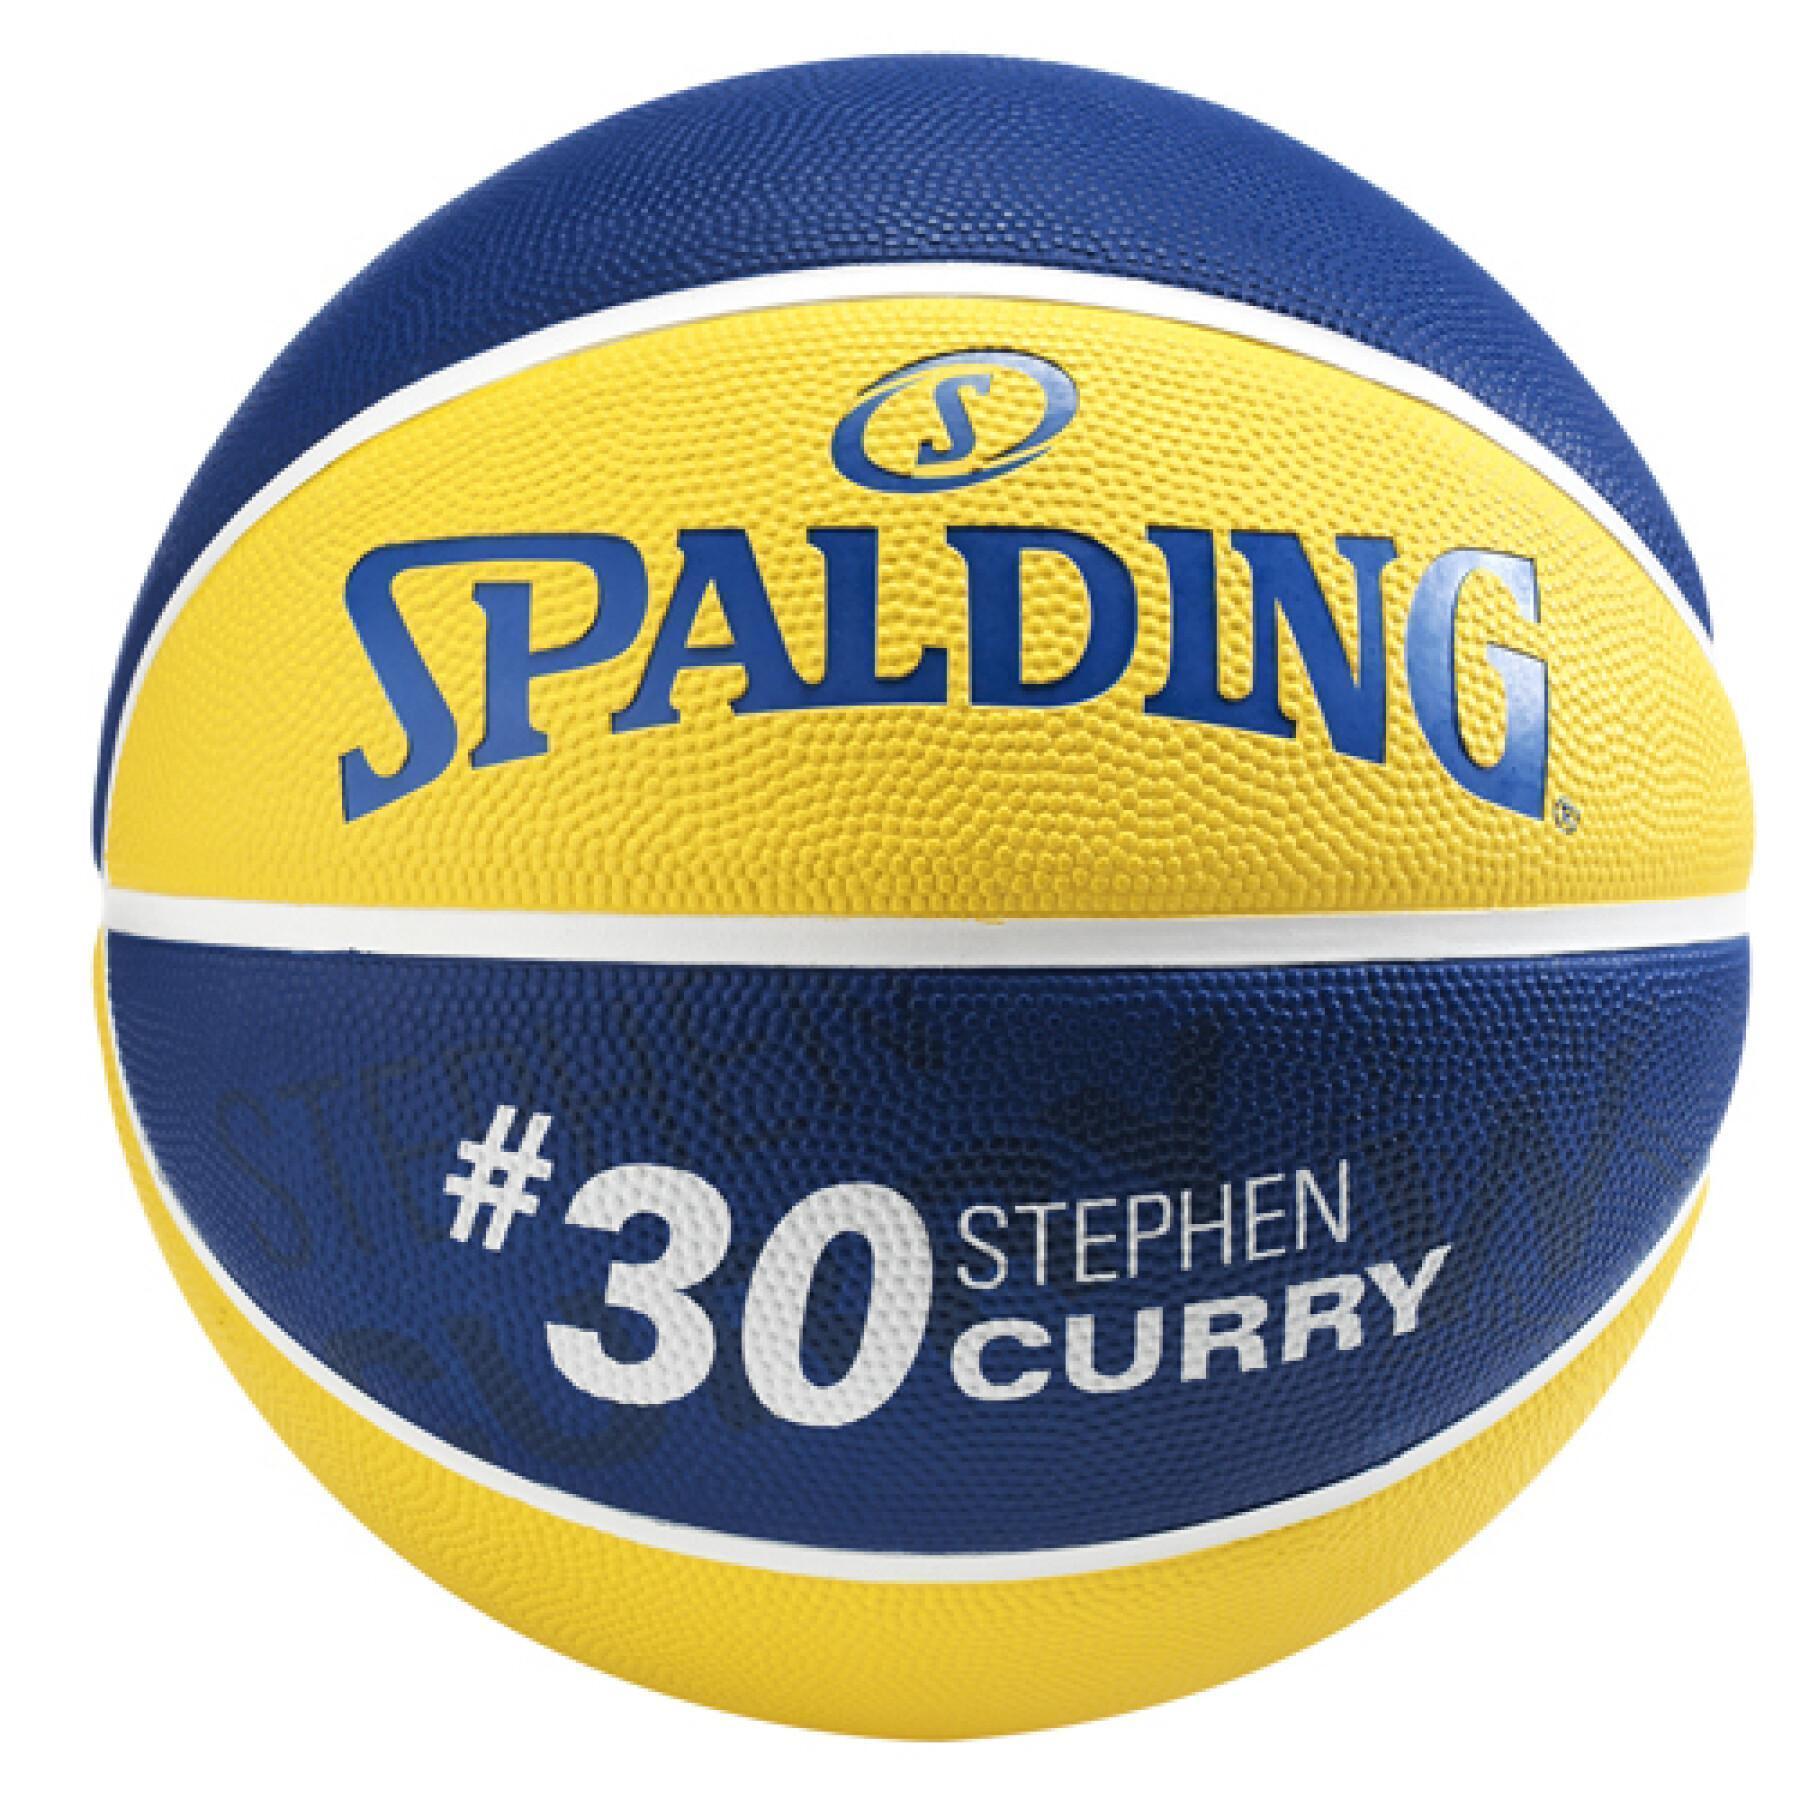 Balloon Spalding Player Stephen Curry